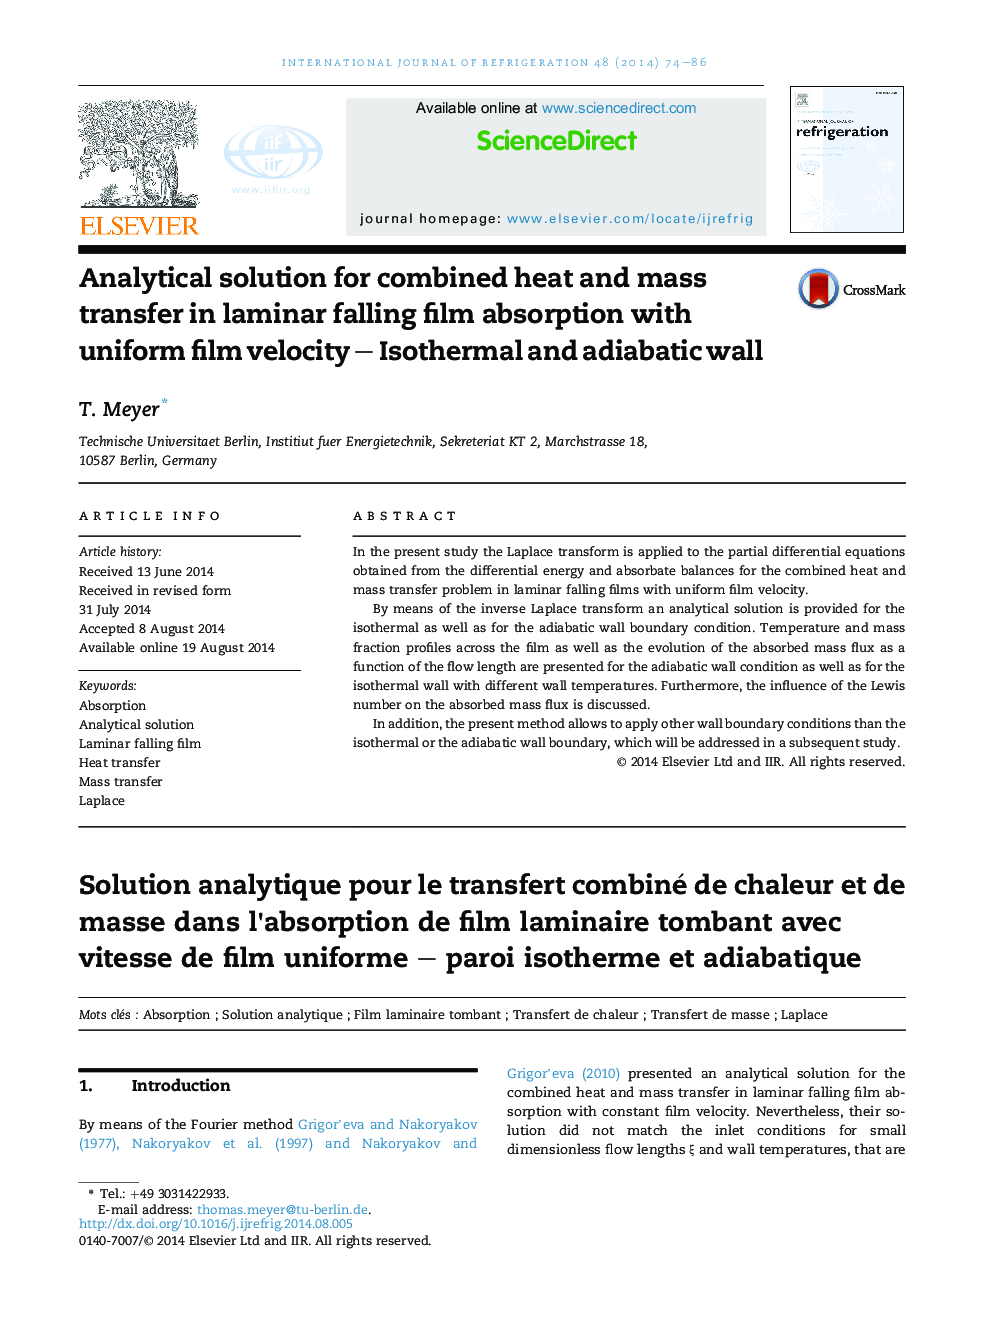 Analytical solution for combined heat and mass transfer in laminar falling film absorption with uniform film velocity – Isothermal and adiabatic wall